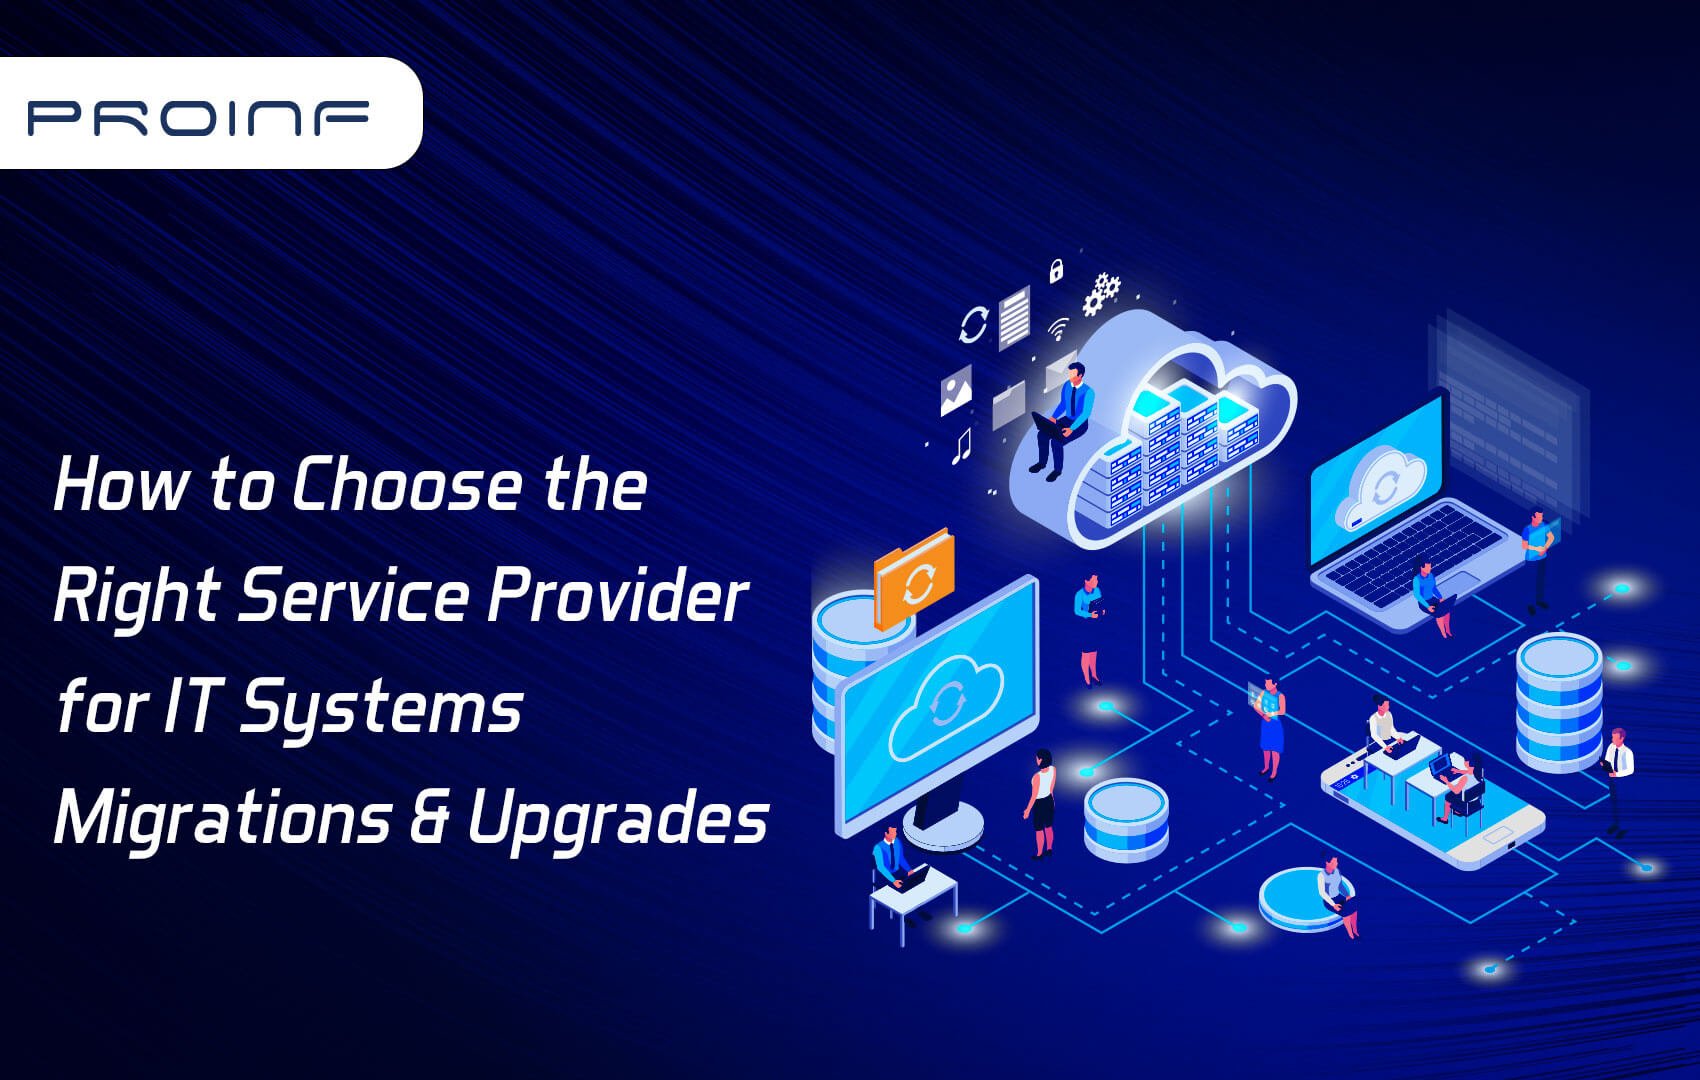 How to Choose the Right Service Provider for IT Systems Migrations & Upgrades